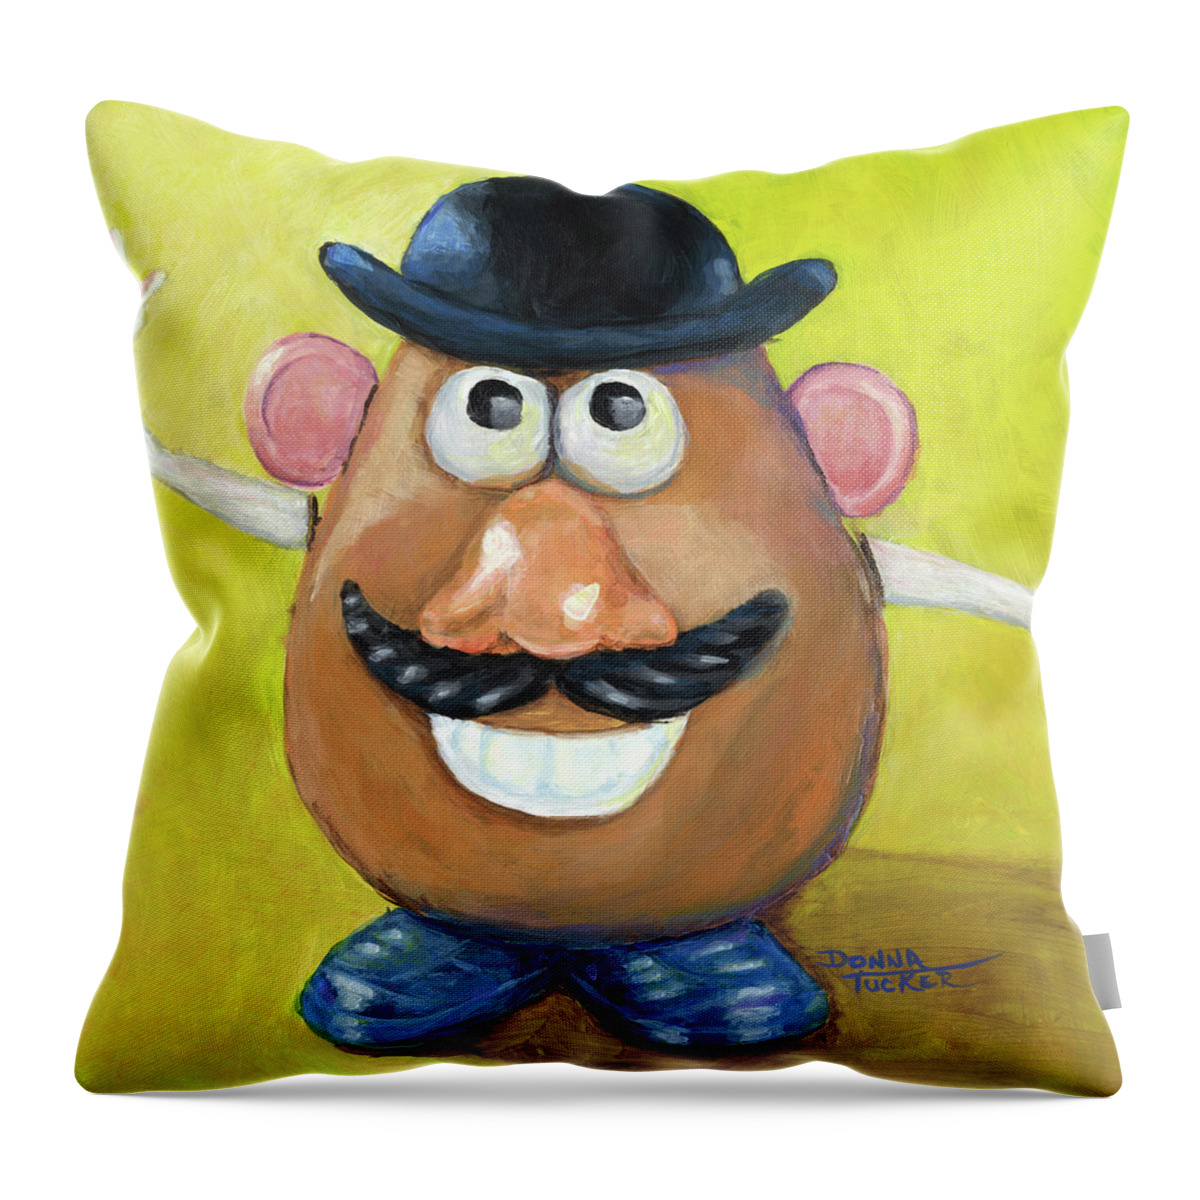 Toy Throw Pillow featuring the painting Mr. Potato Head by Donna Tucker